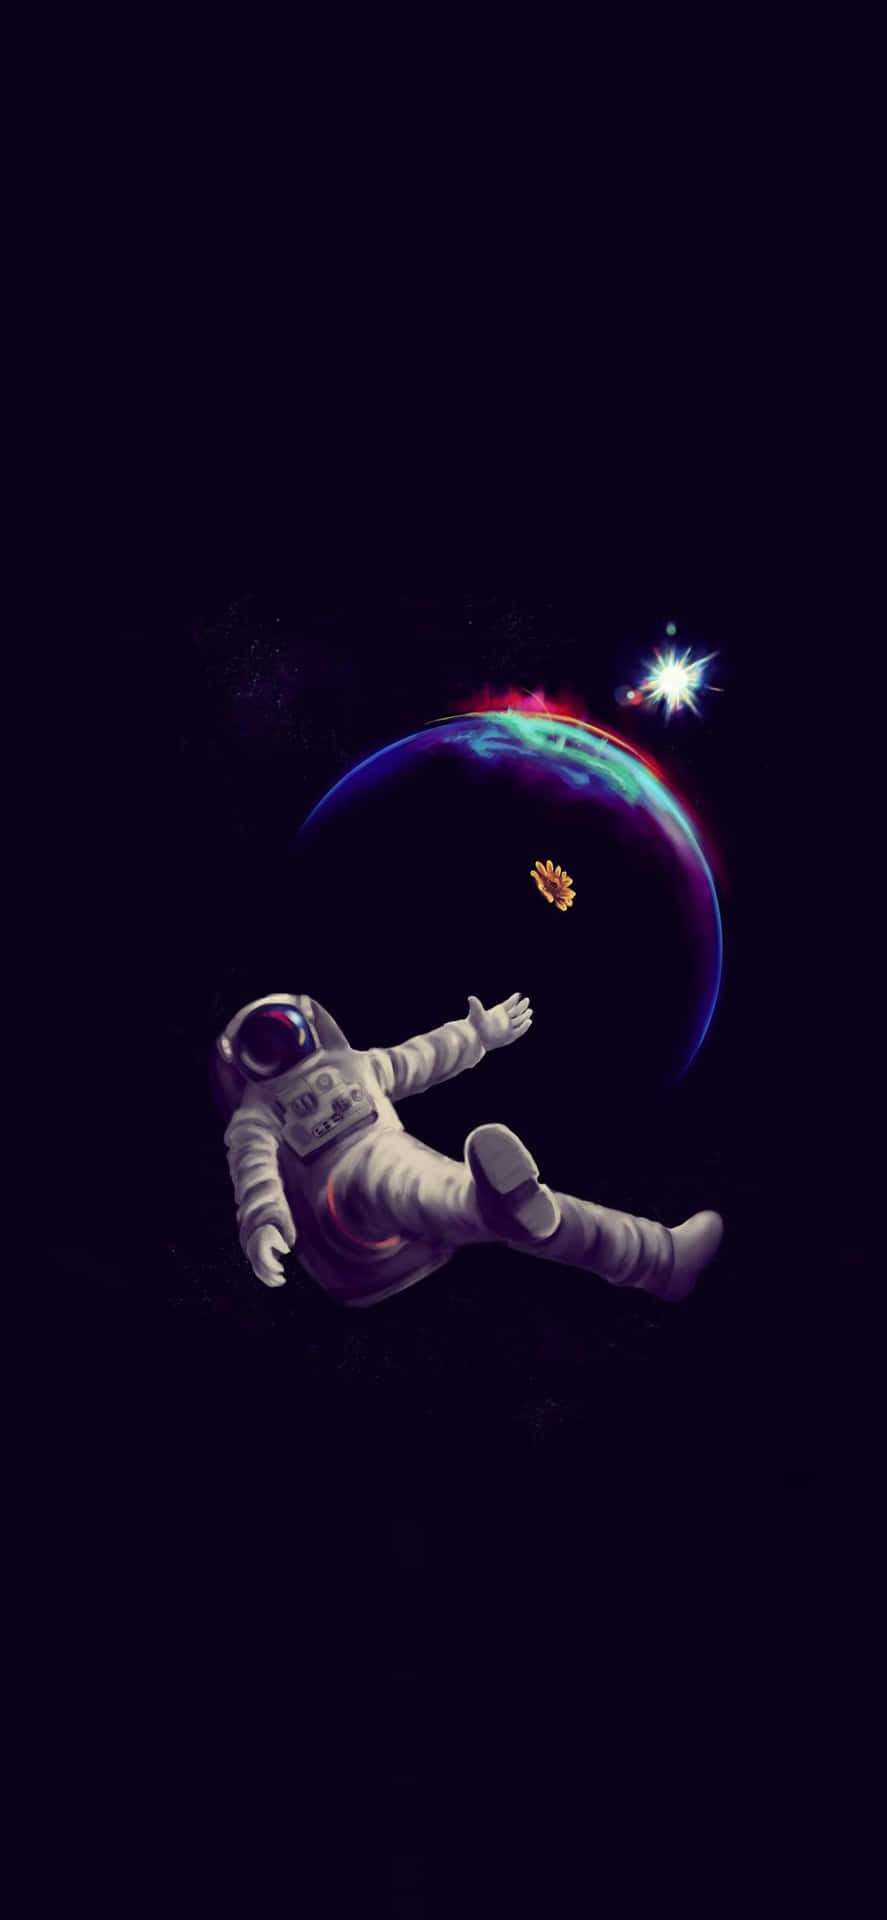 Representing the clash of two worlds – this astronaut iPhone wallpaper brings the infinite possibilities of space to your pocket. Wallpaper